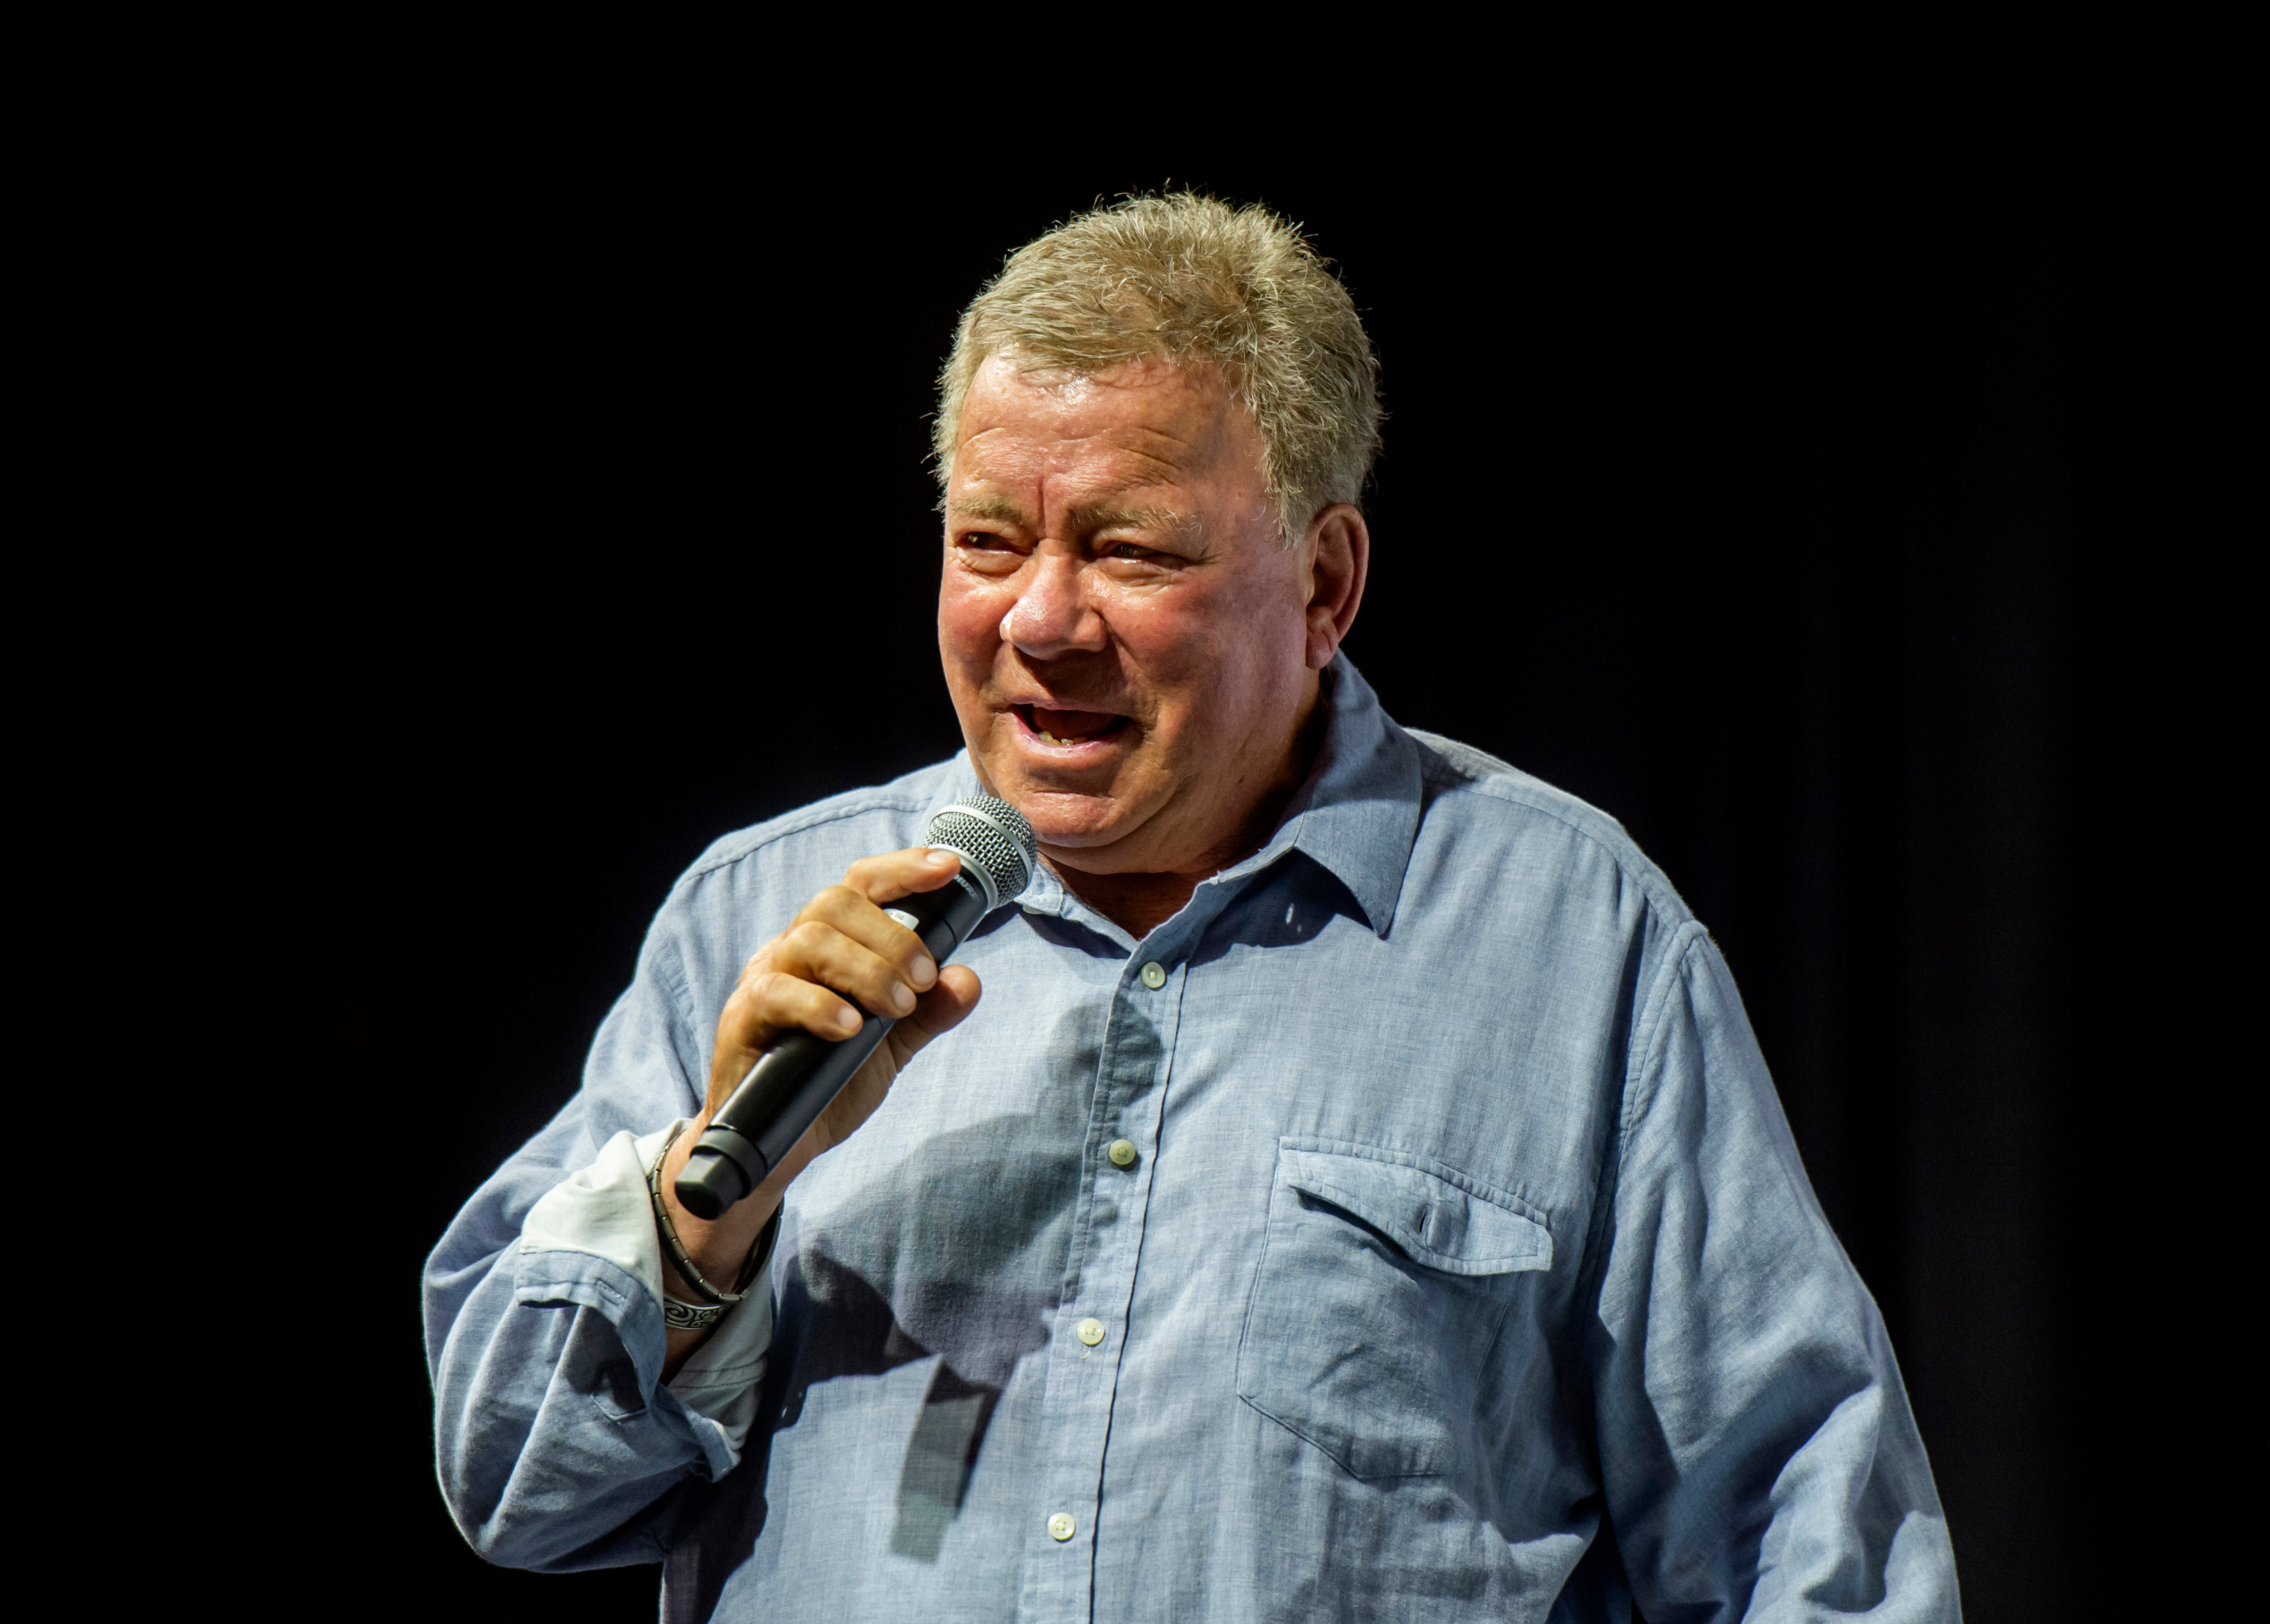 'My Trip To Space Was Supposed To Be A Celebration, Instead, It Felt Like A Funeral': William Shatner Shares Experience In Book